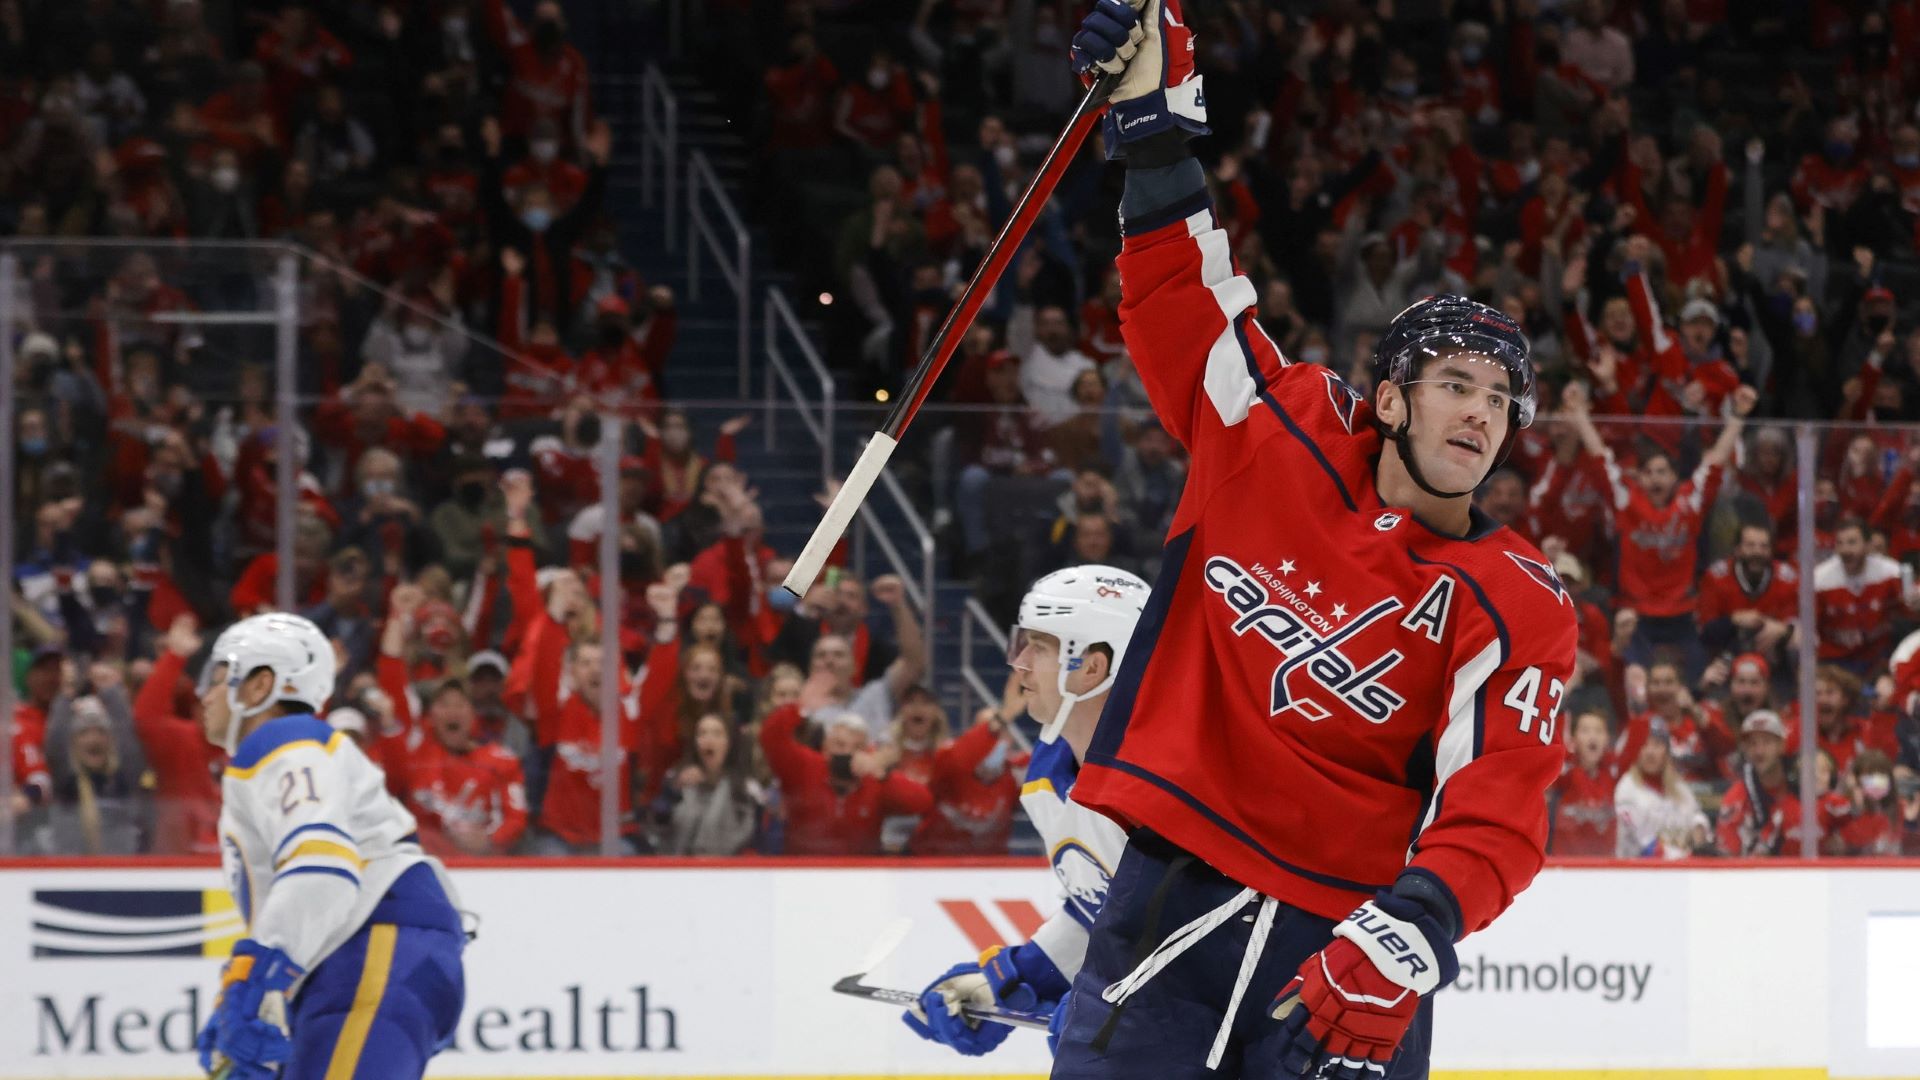 Why Tom Wilson Wishes He Had Scored 1 Goal Against Buffalo Instead of 2